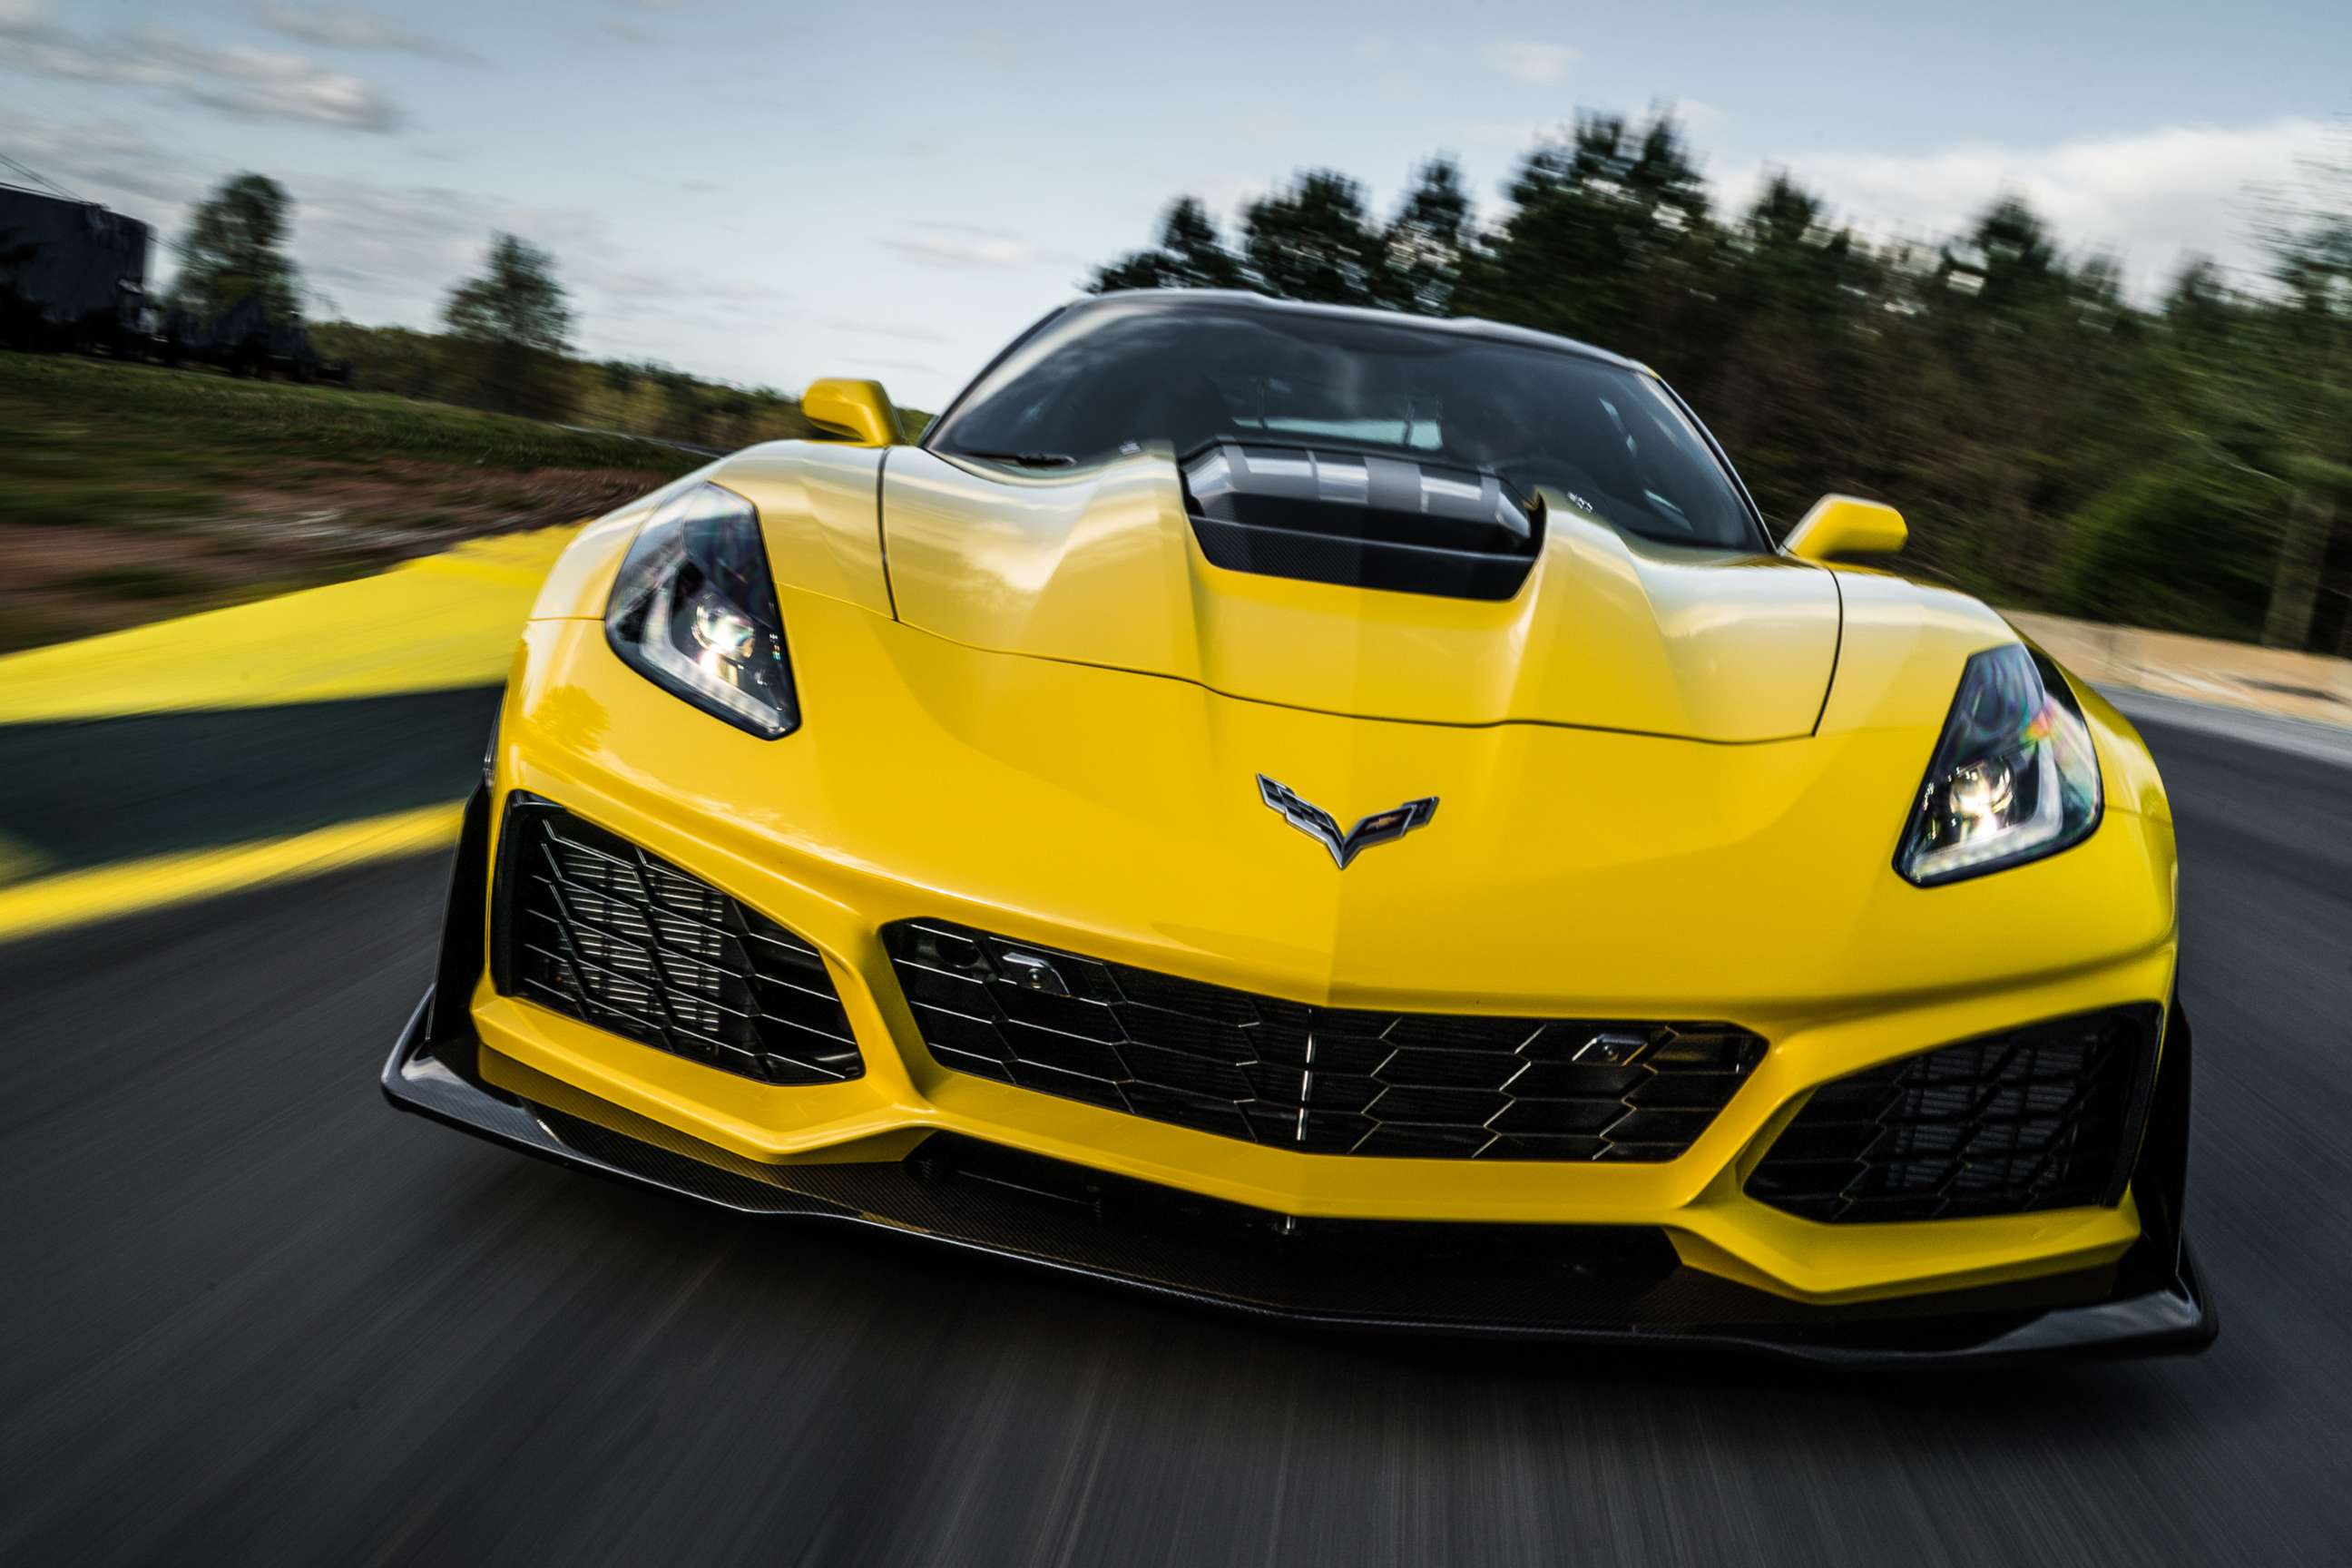 PHOTO: Corvette's iconic front engine design will be a relic of its storied past. Shown here is the $130K ZR1.